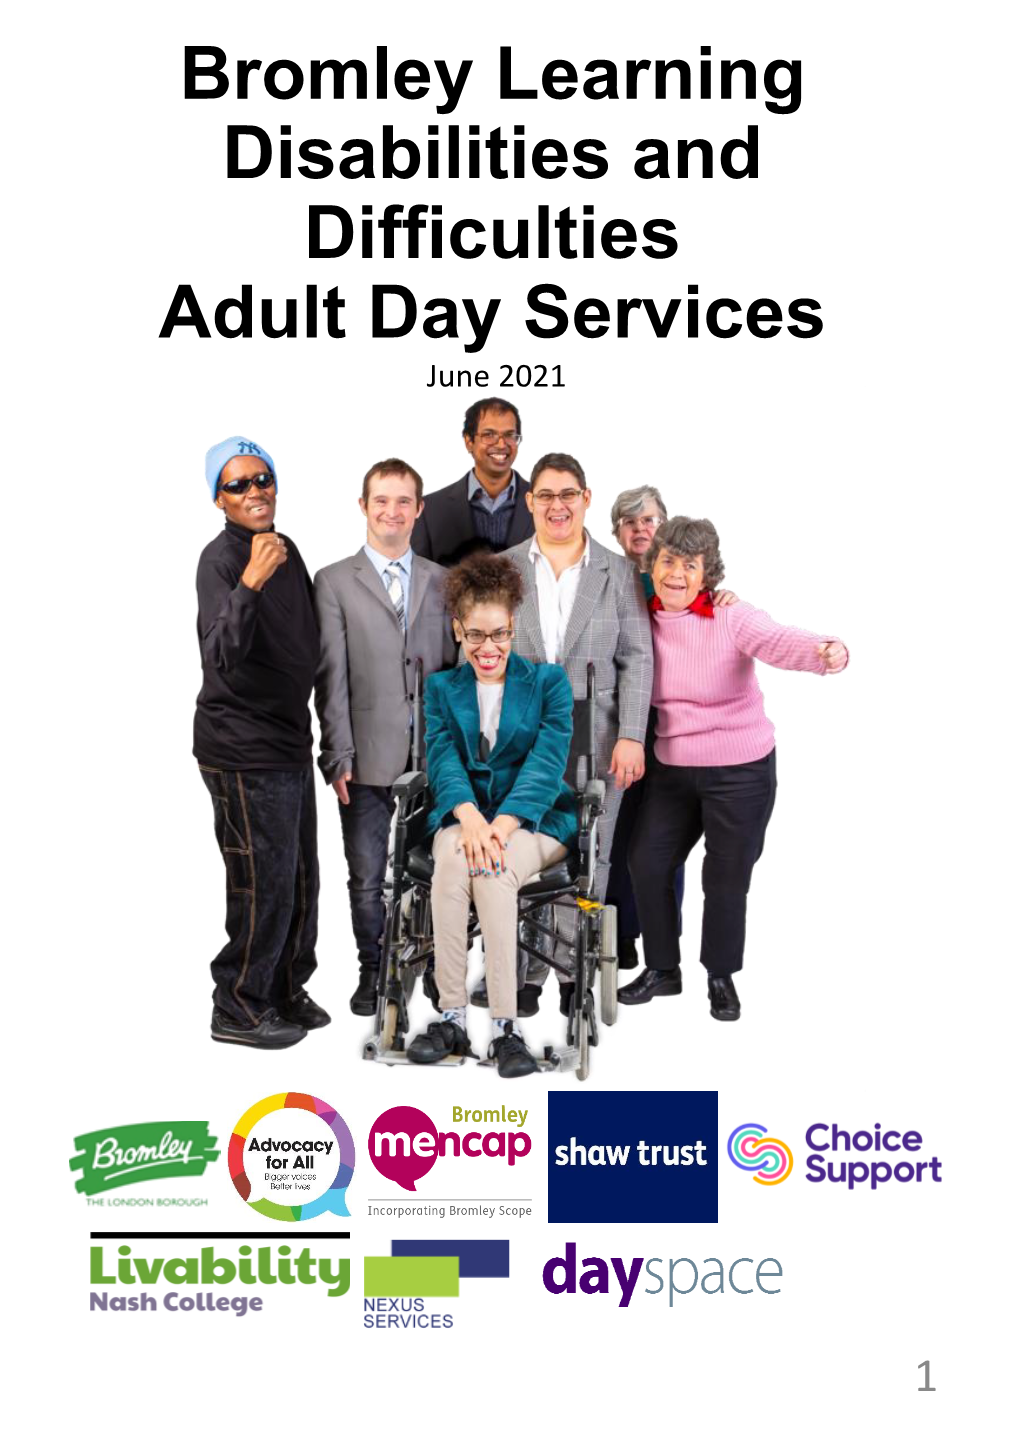 Bromley Learning Disabilities and Difficulties Adult Day Services June 2021